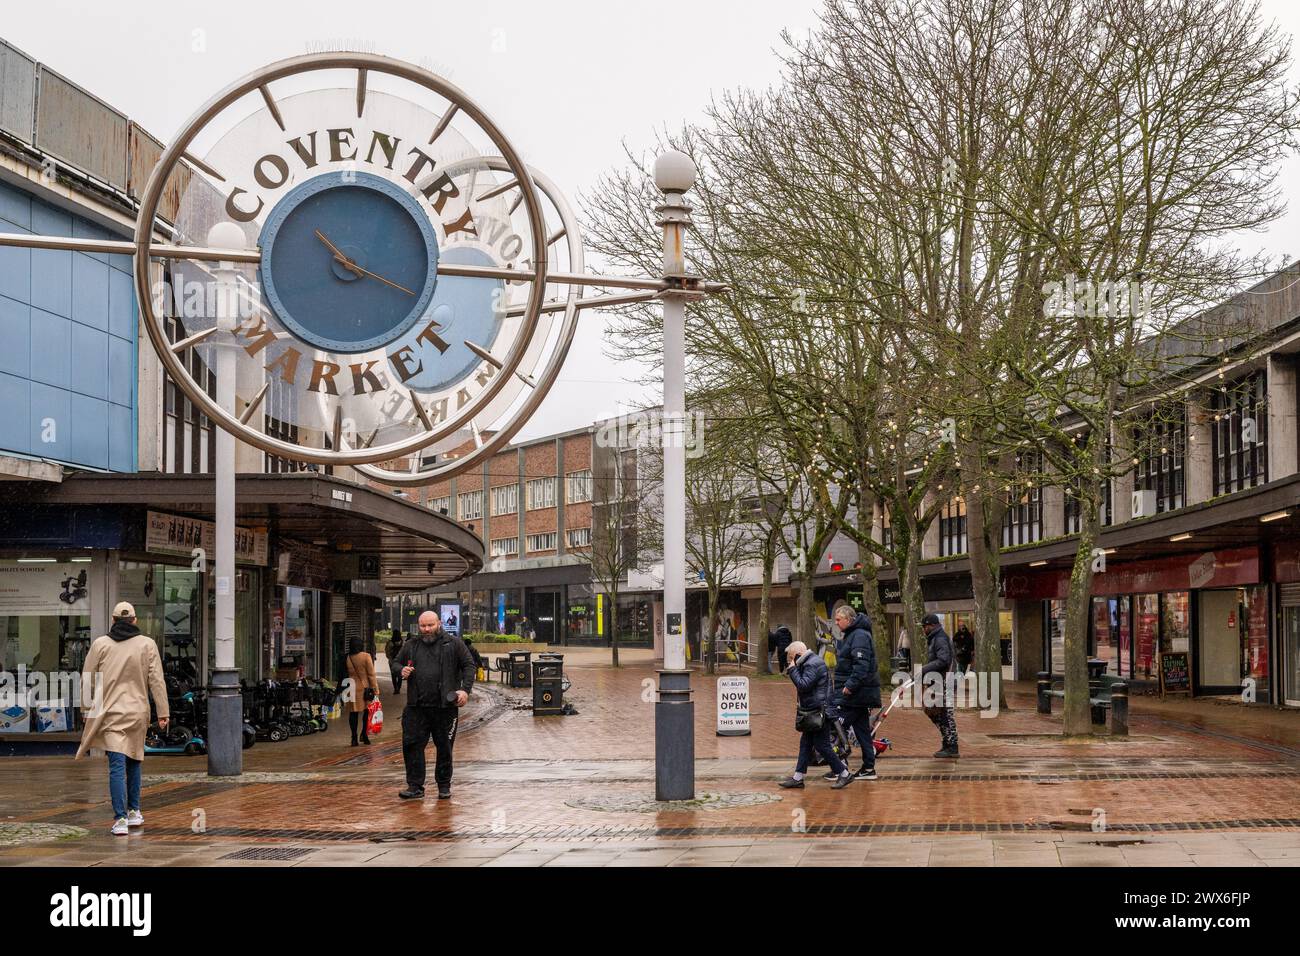 Market Way and Coventry Market entrance, Coventry, West Midlands, UK. Stock Photo